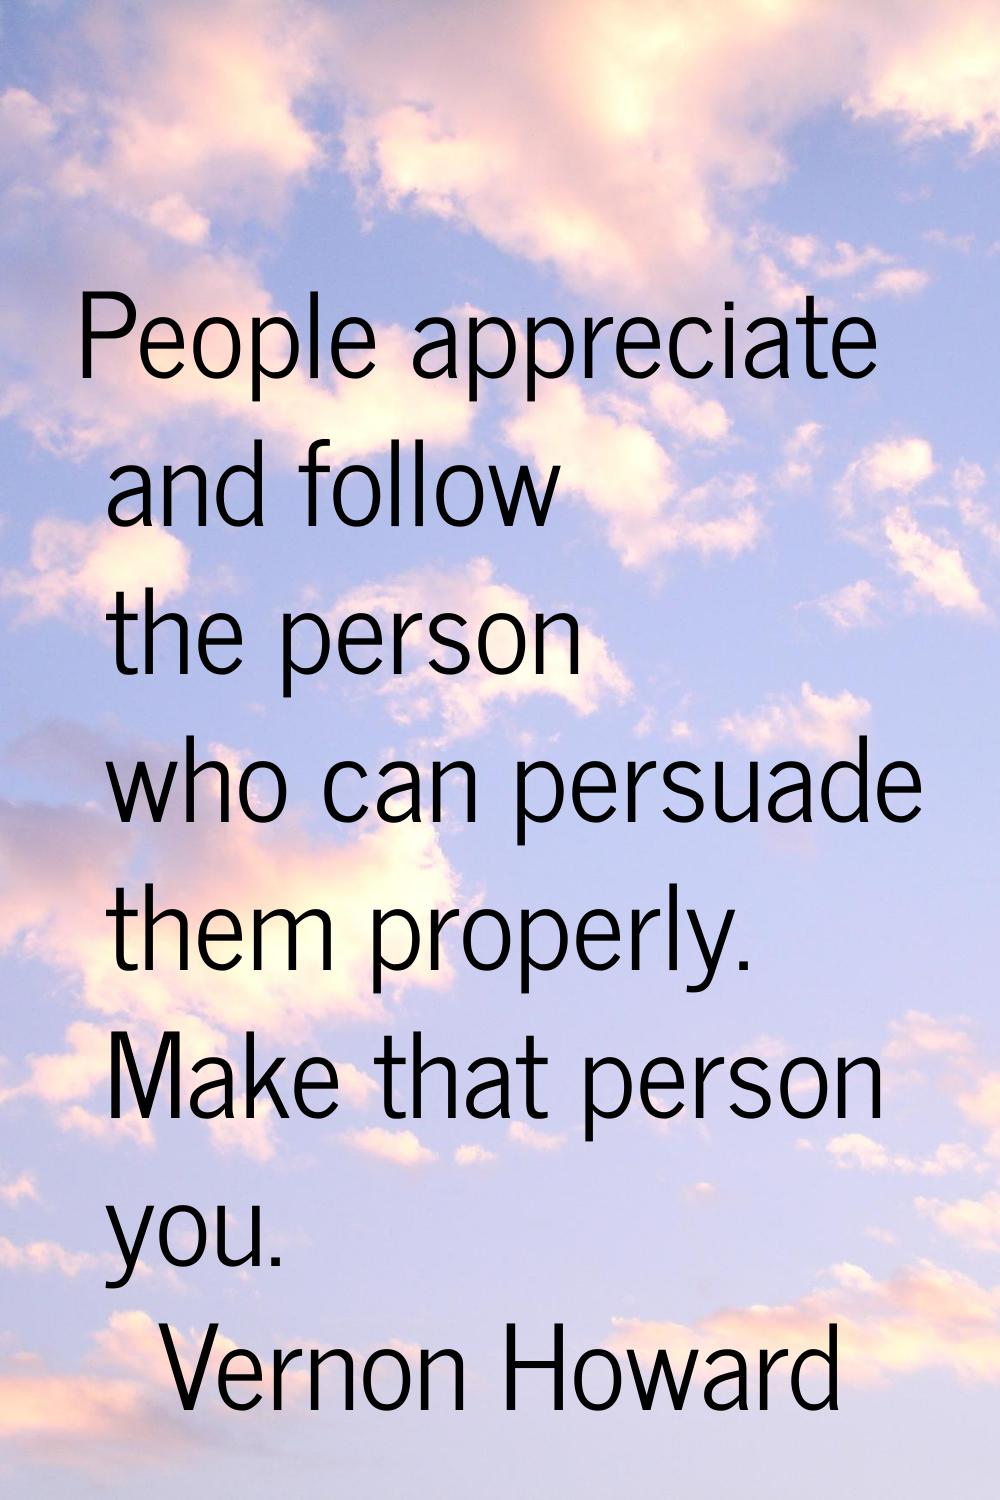 People appreciate and follow the person who can persuade them properly. Make that person you.